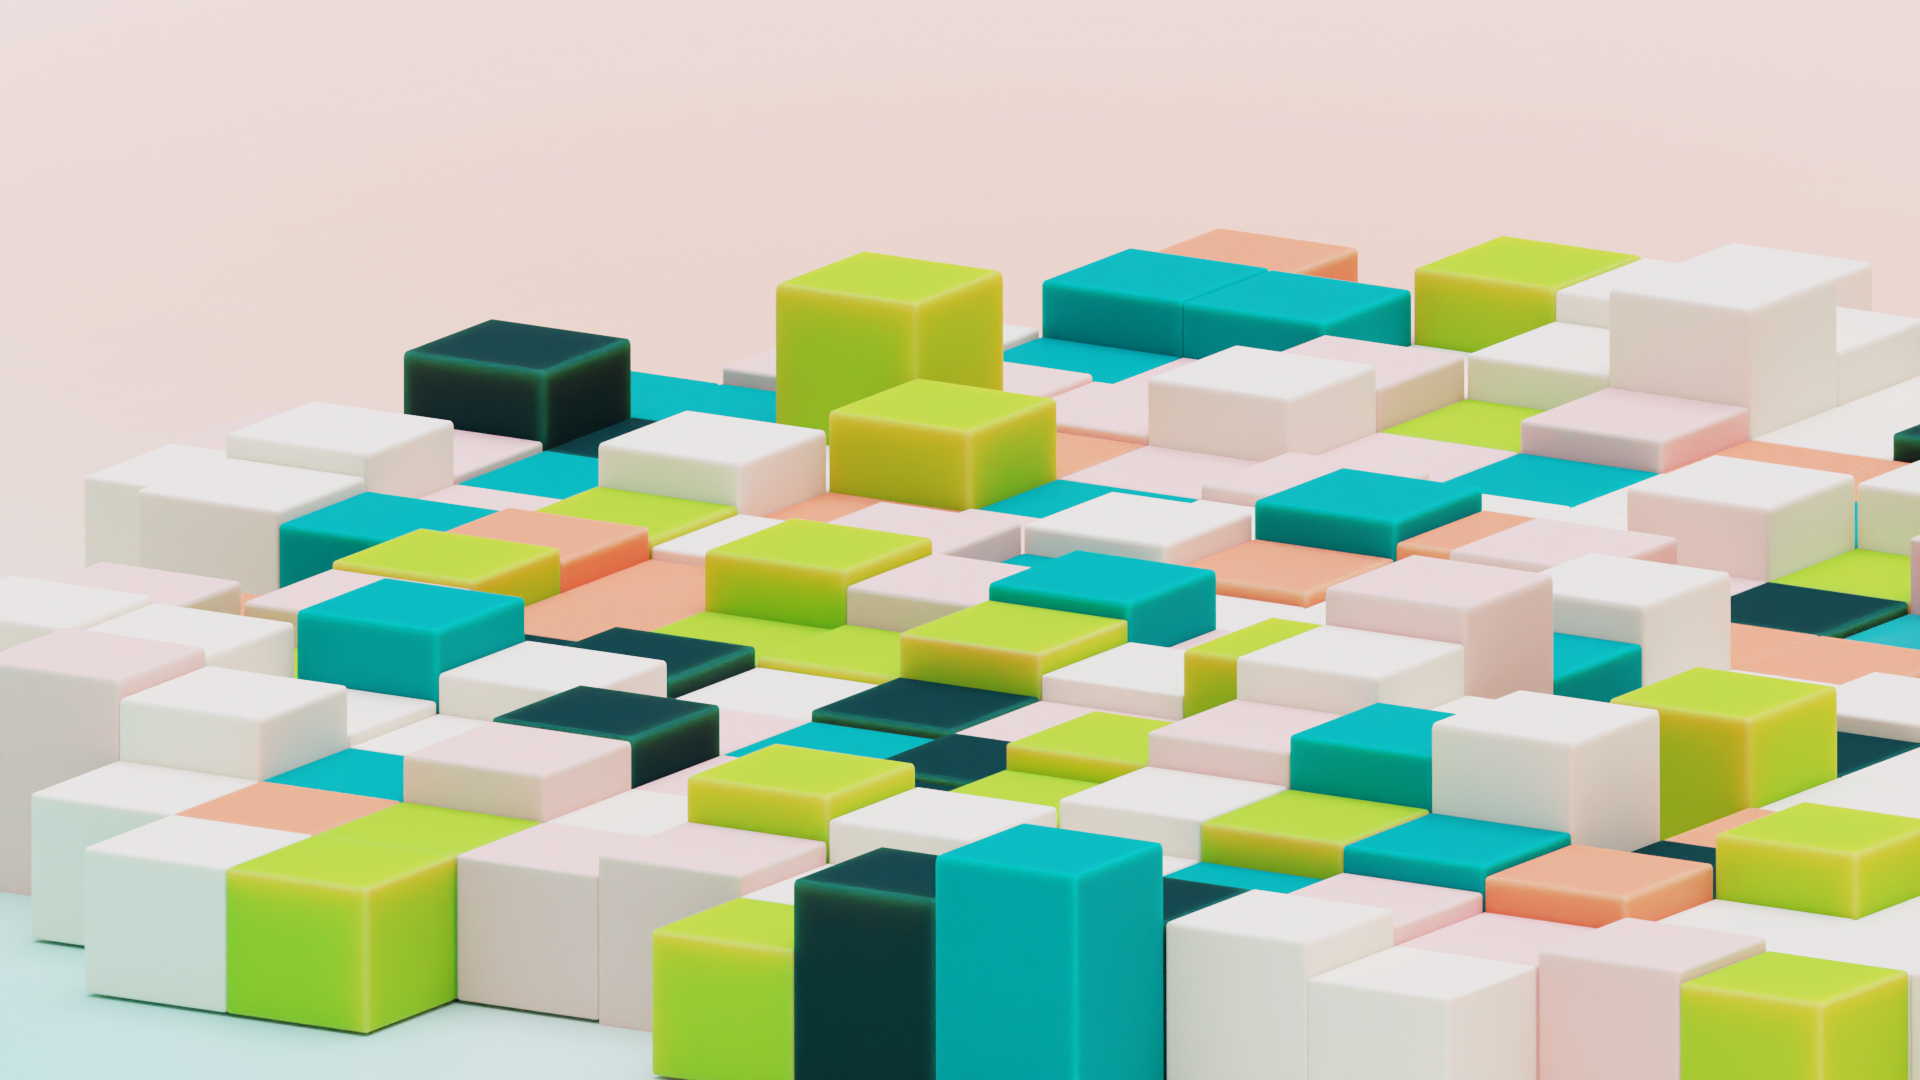 &why: abstract 3d landscape with cubes in green and rose tones